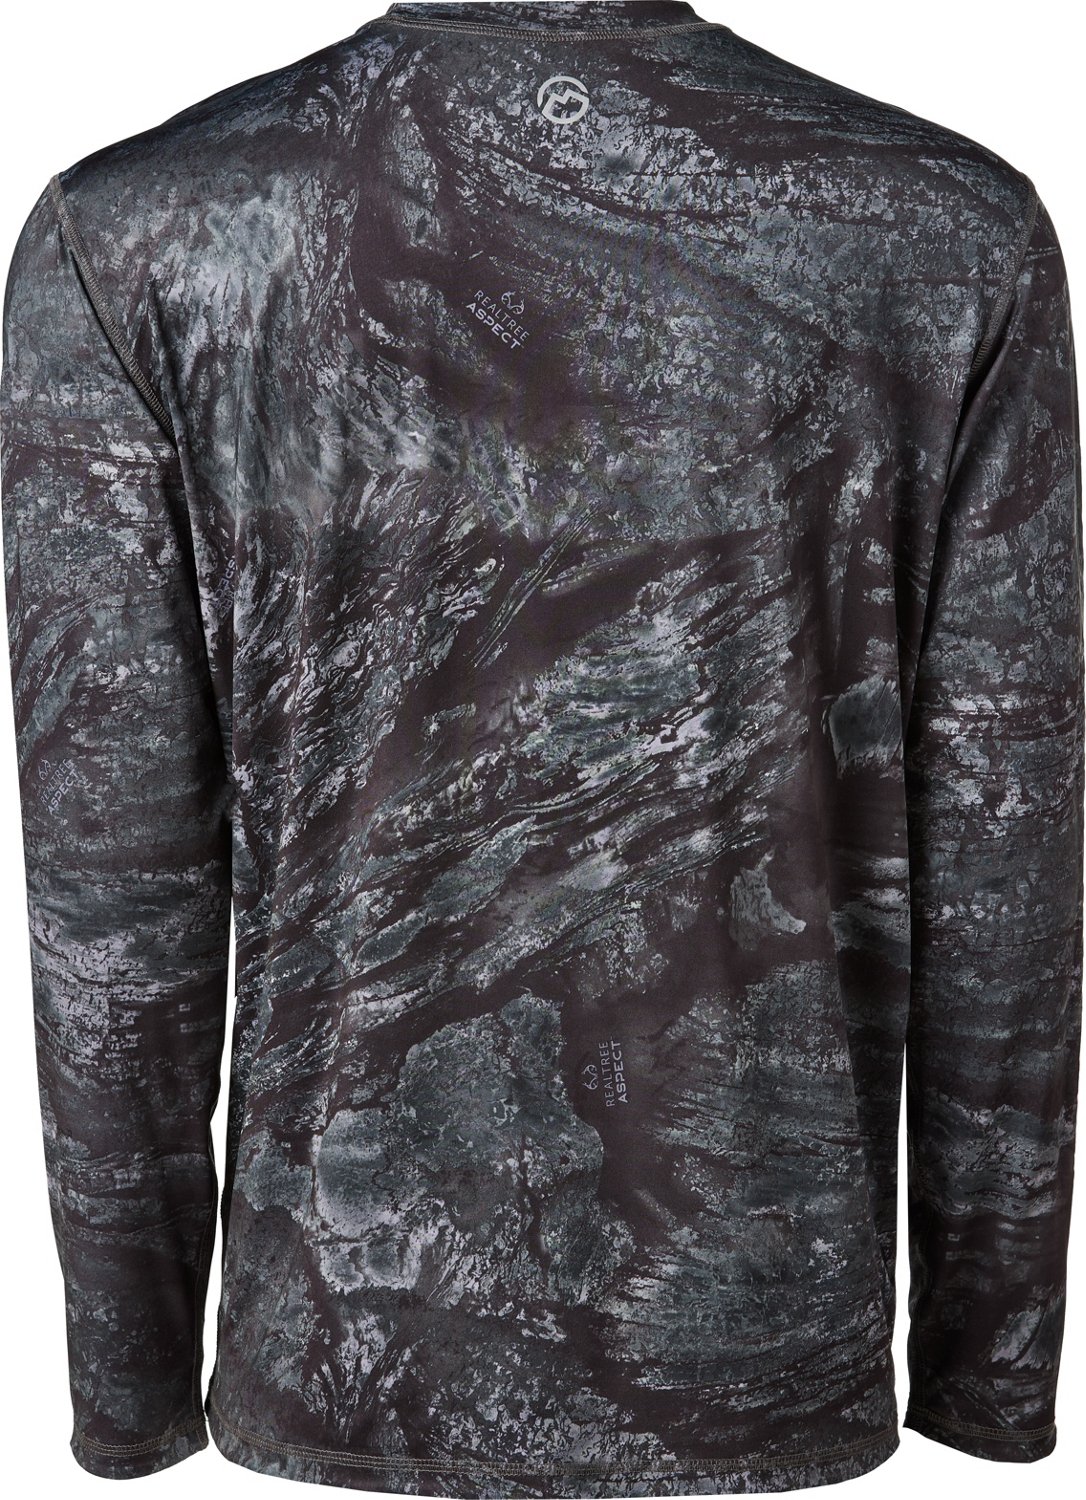 Realtree Women's Fishing Camo UV Protection Shirts and Hoodies Long Sleeve  for Fishing, Running and Hiking